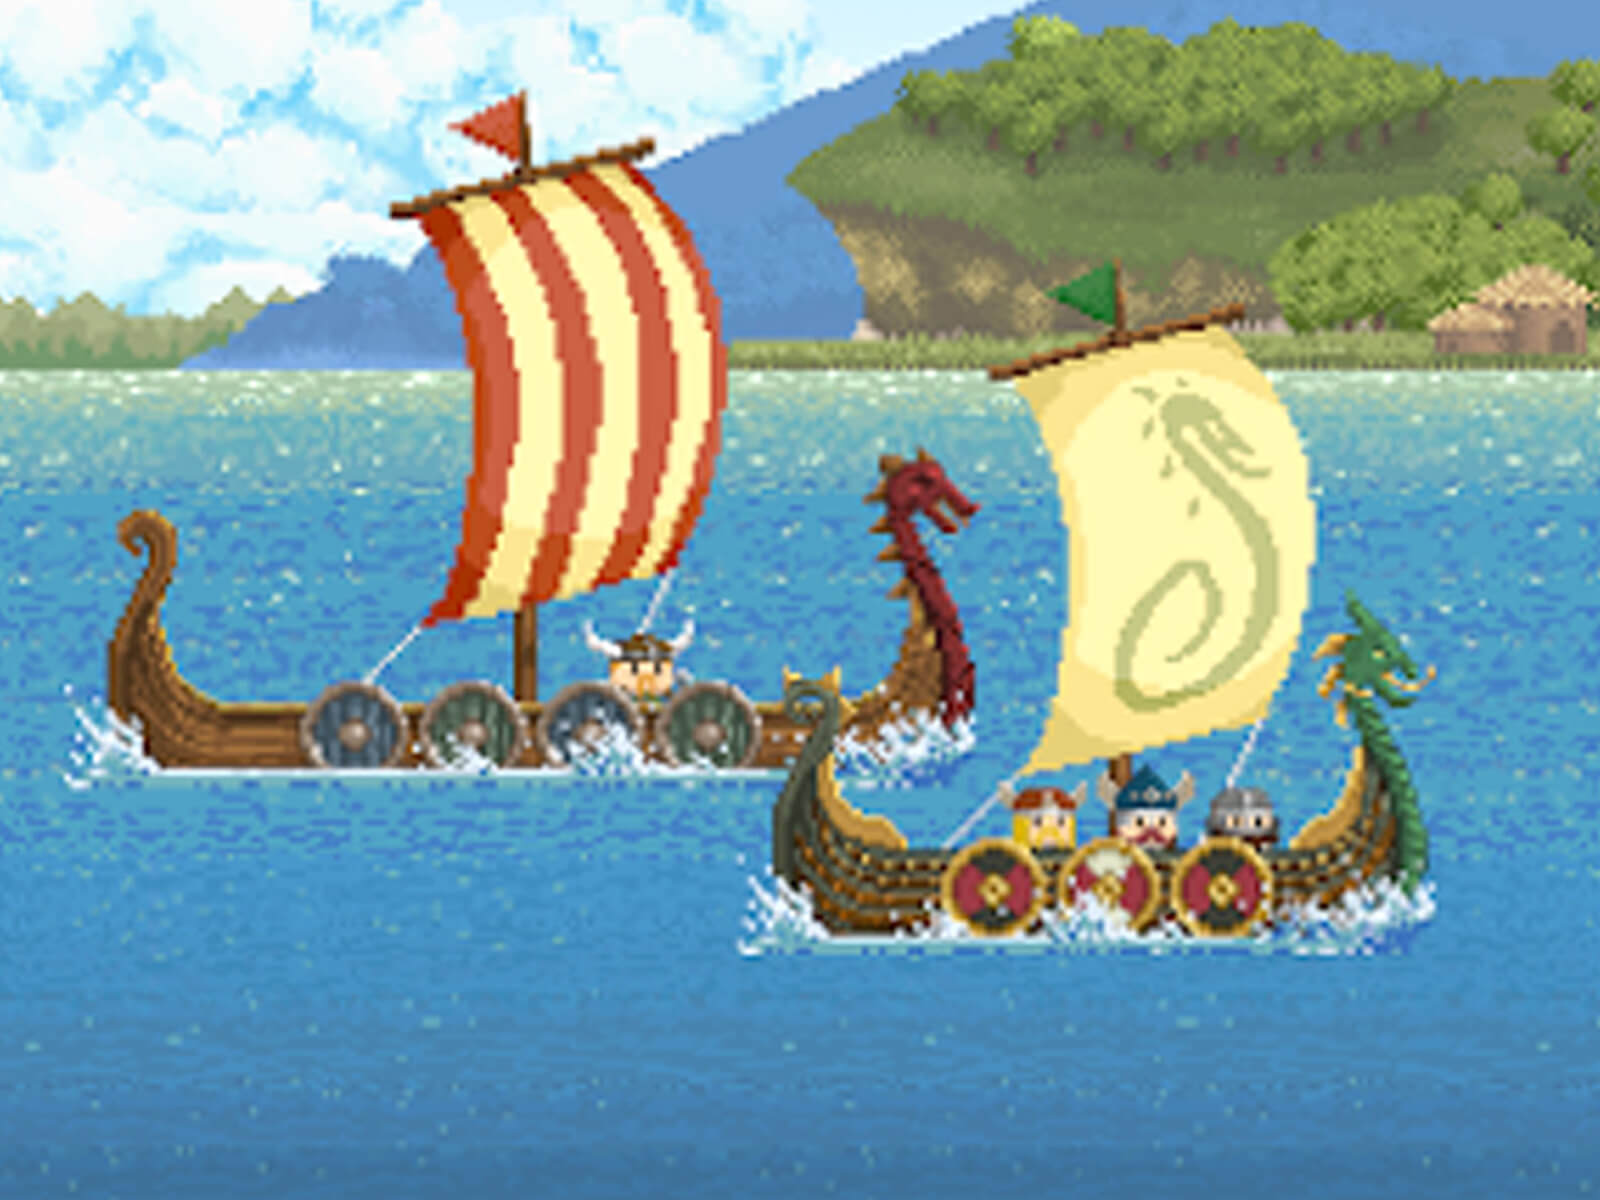 Pixel art screenshot of two viking dragon ships on the water sailing past a village in the background